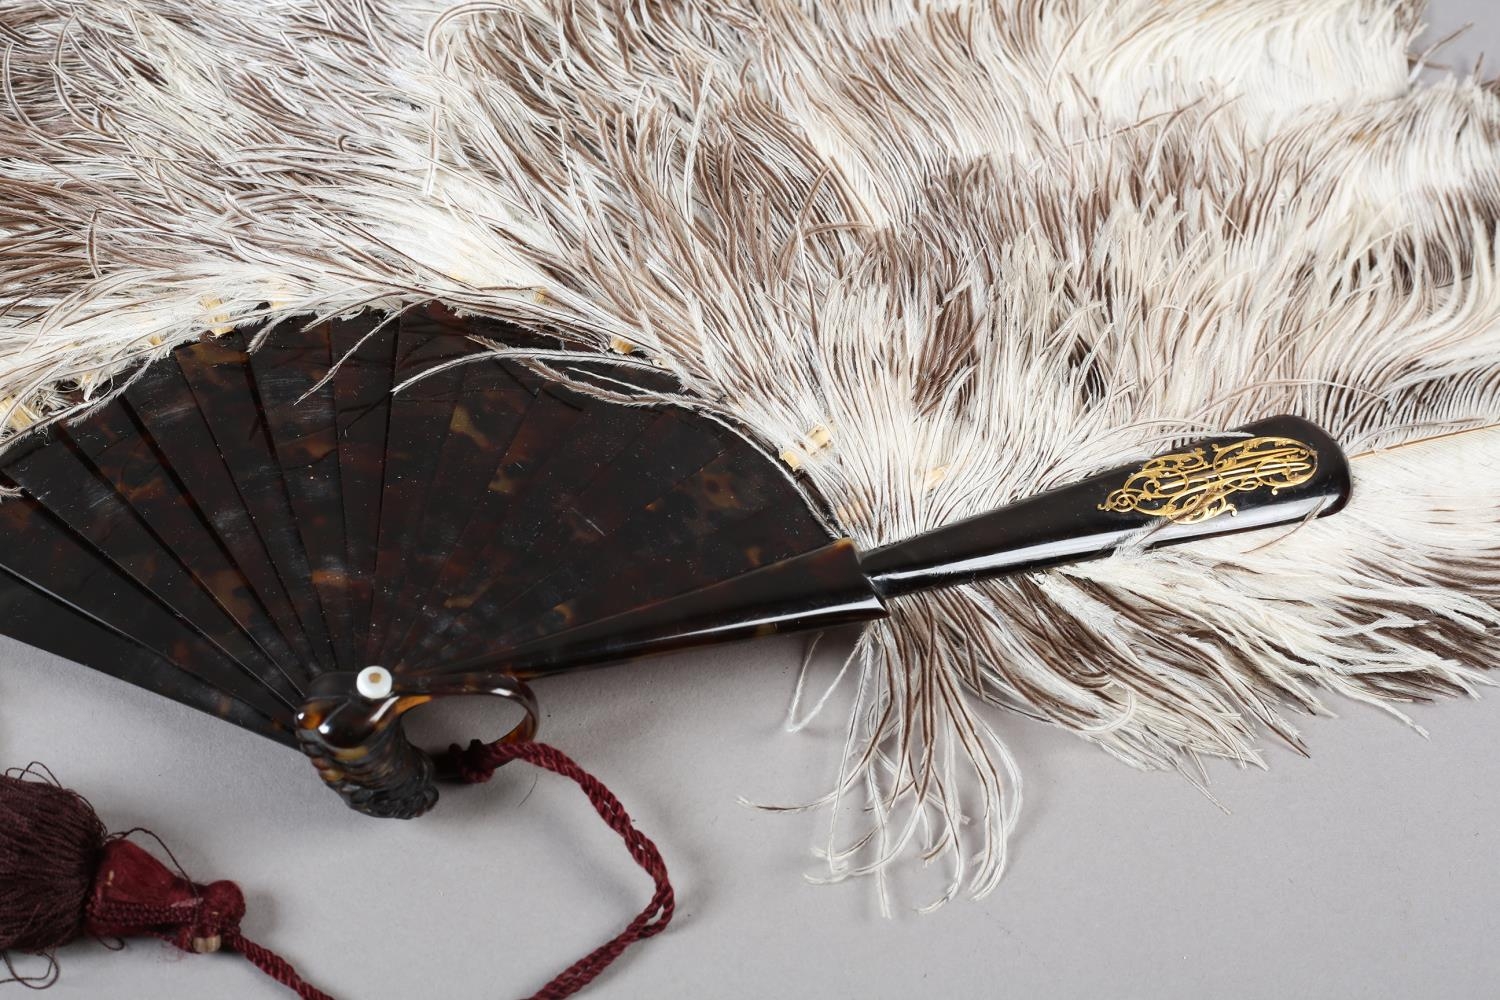 A Duvelleroy female ostrich feather fan, mounted on tortoiseshell, marked “Duvelleroy” in gold on - Image 2 of 4